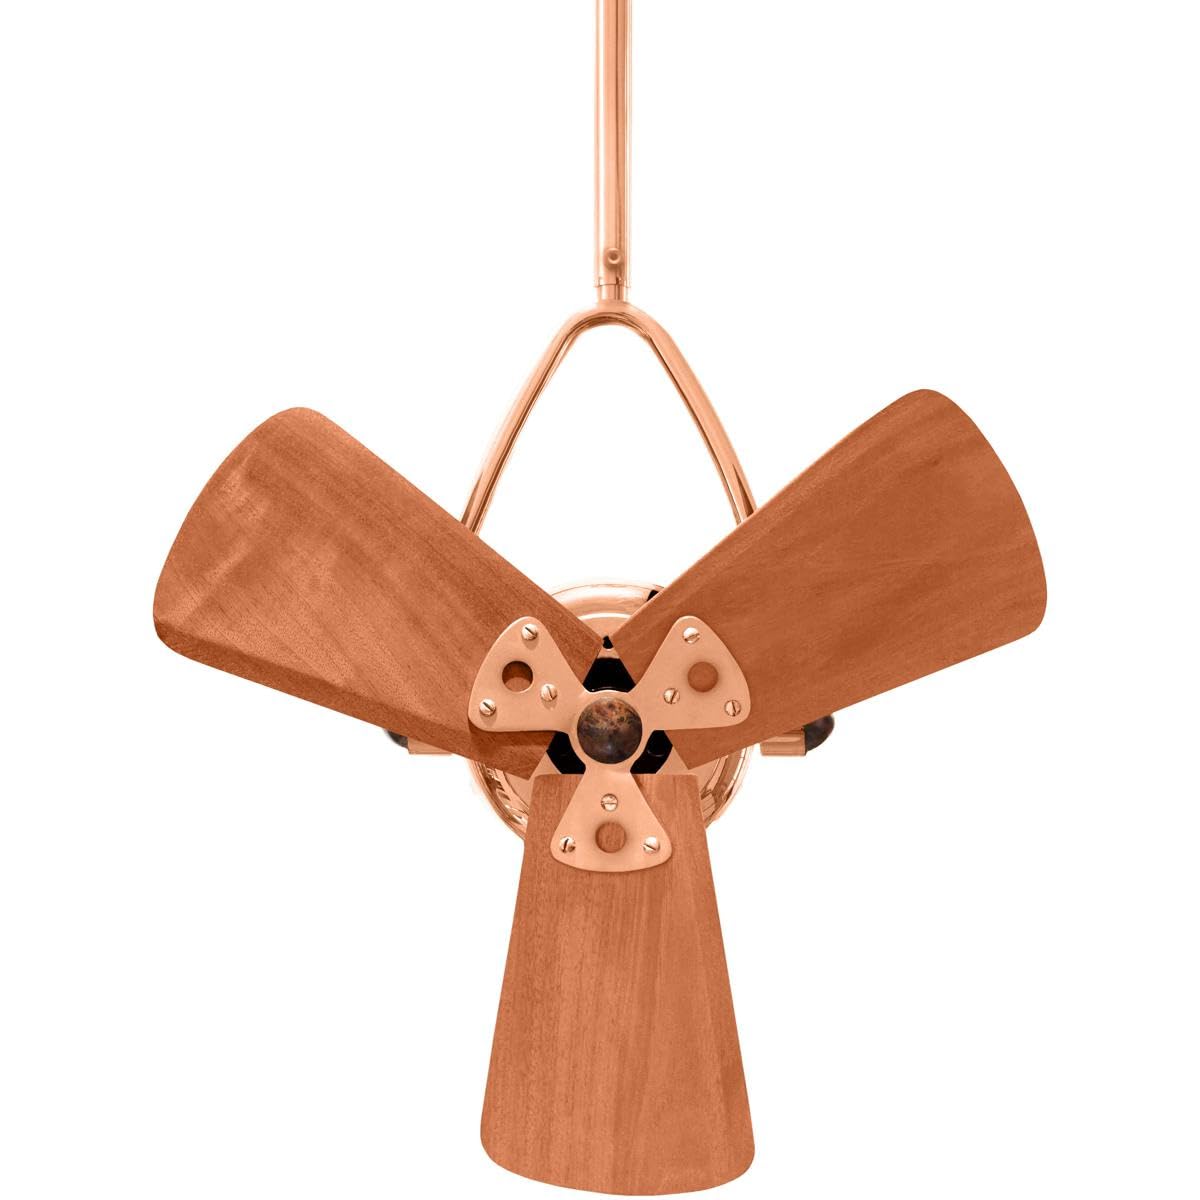 Matthews Fan JD-CP-WD Jarold Direcional ceiling fan in Polished Copper finish with solid sustainable mahogany wood blades.